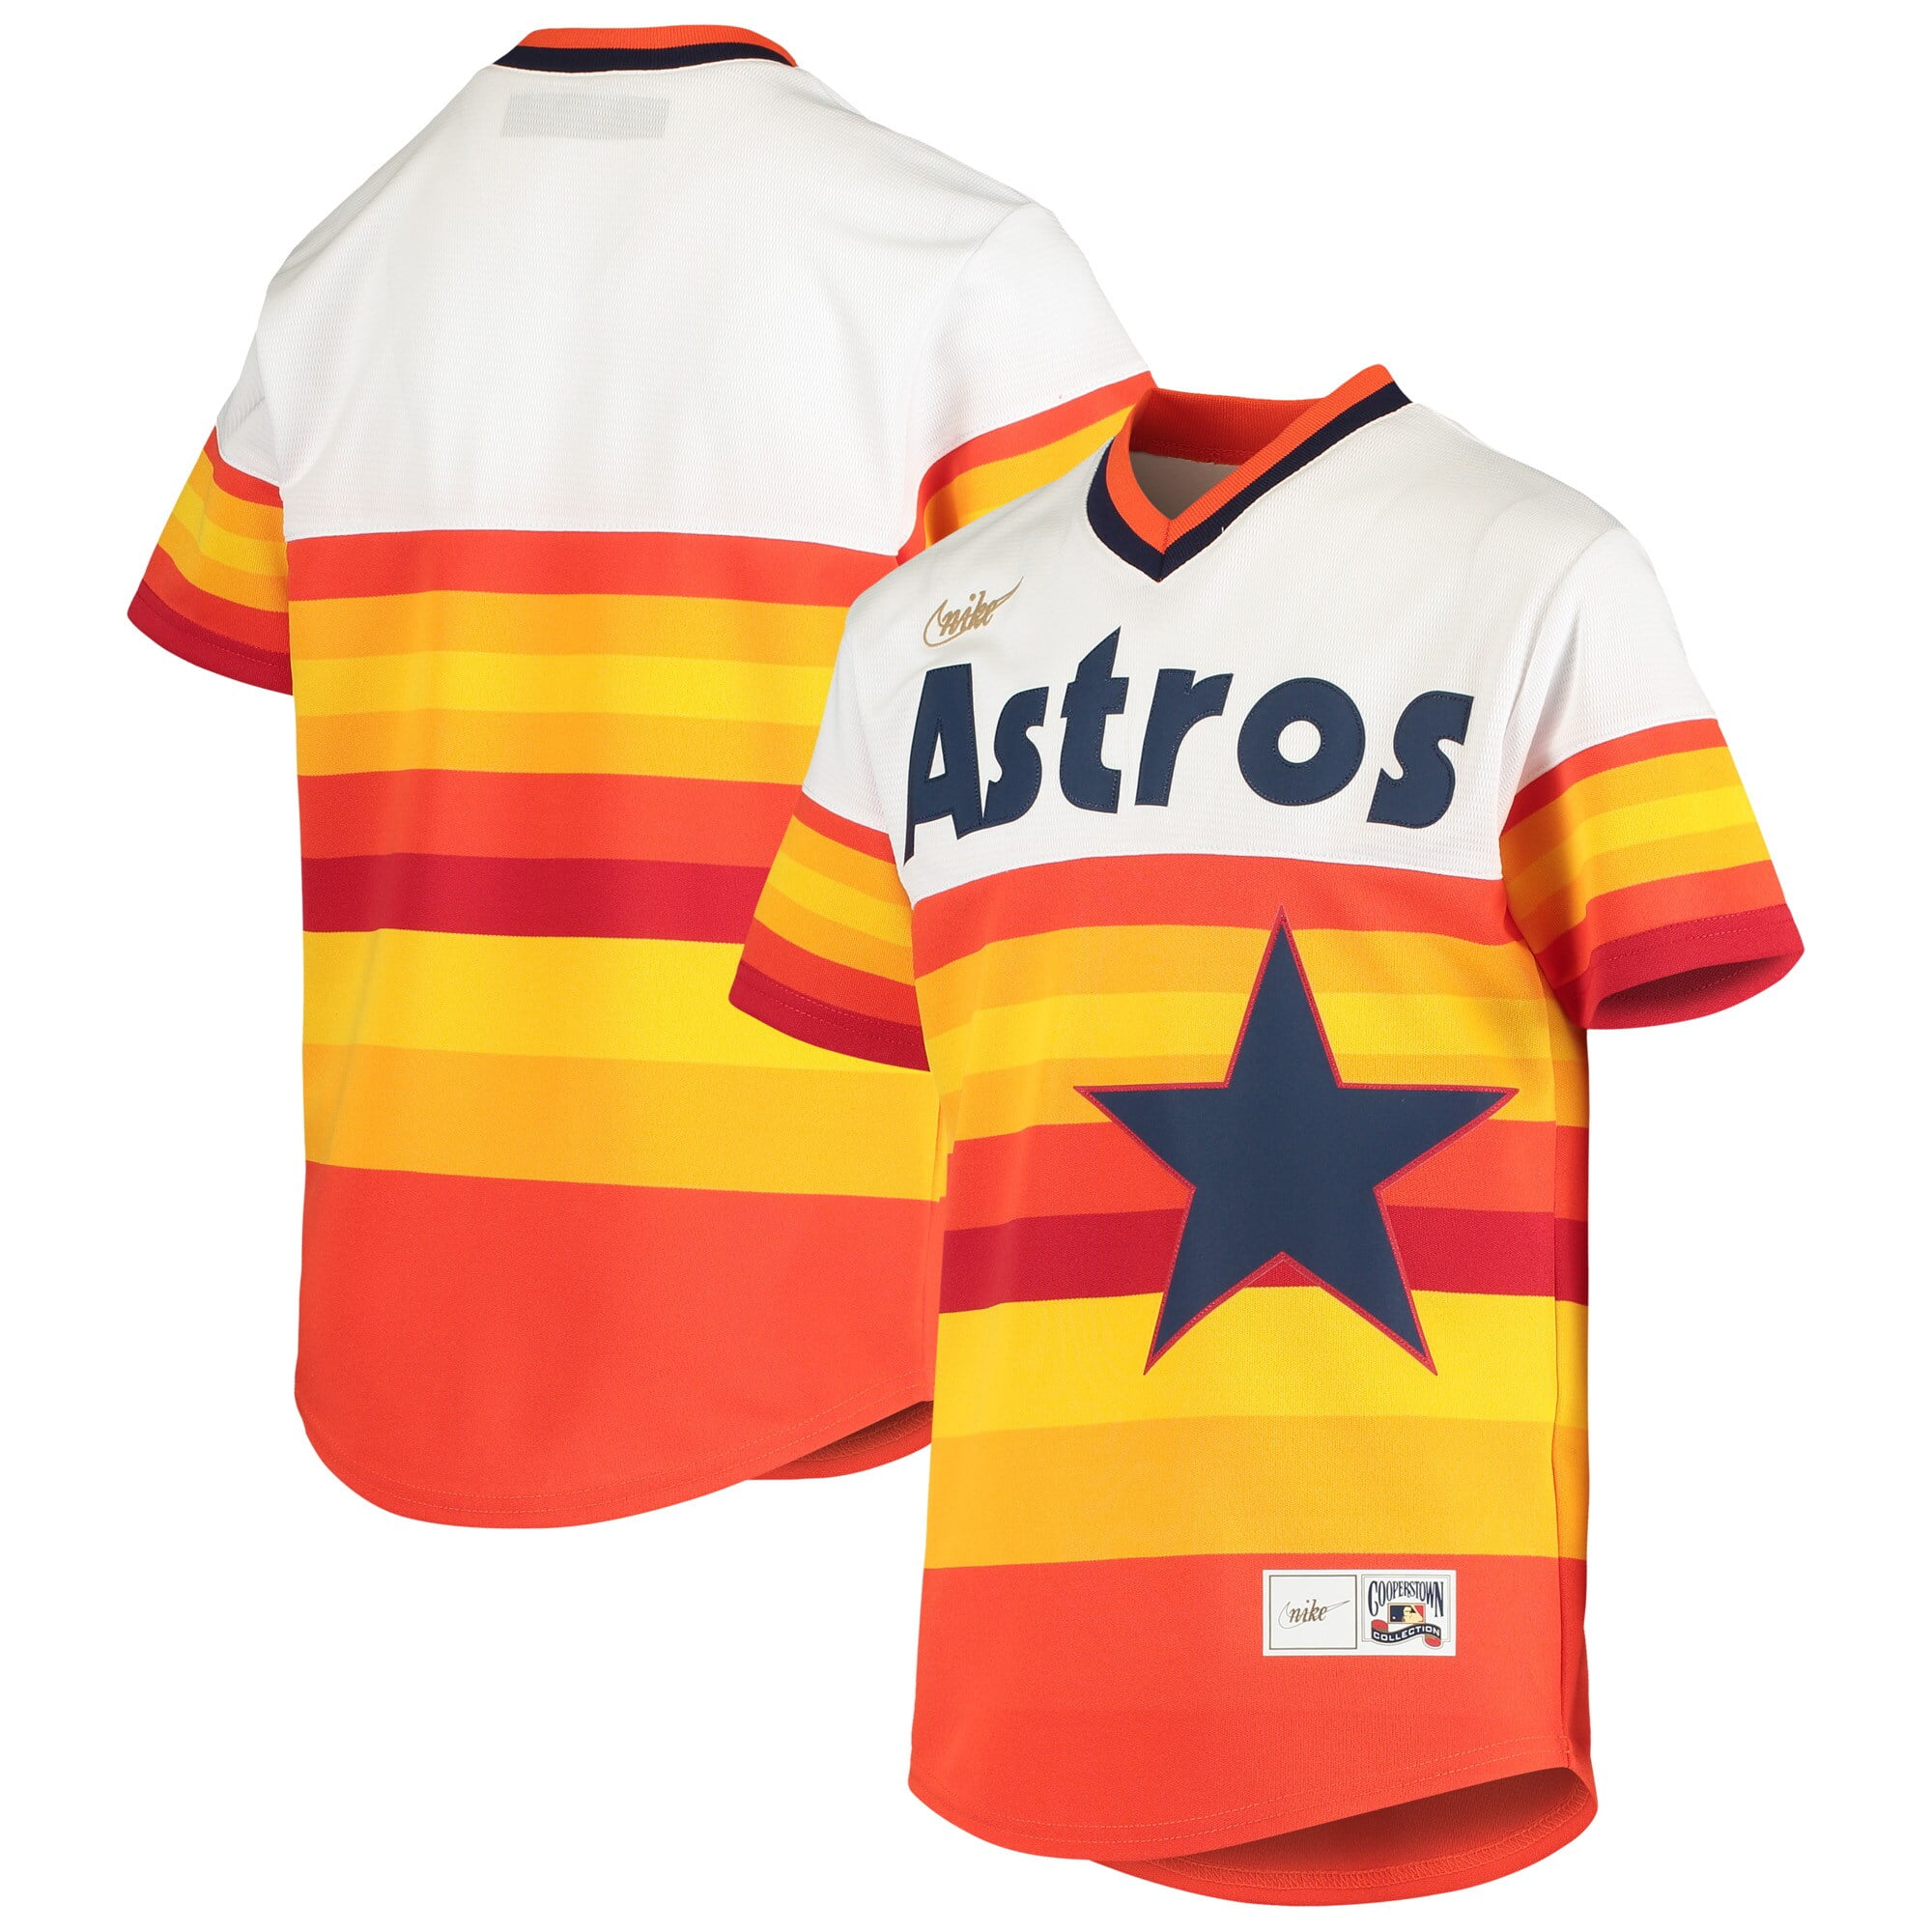 cooperstown collection astros